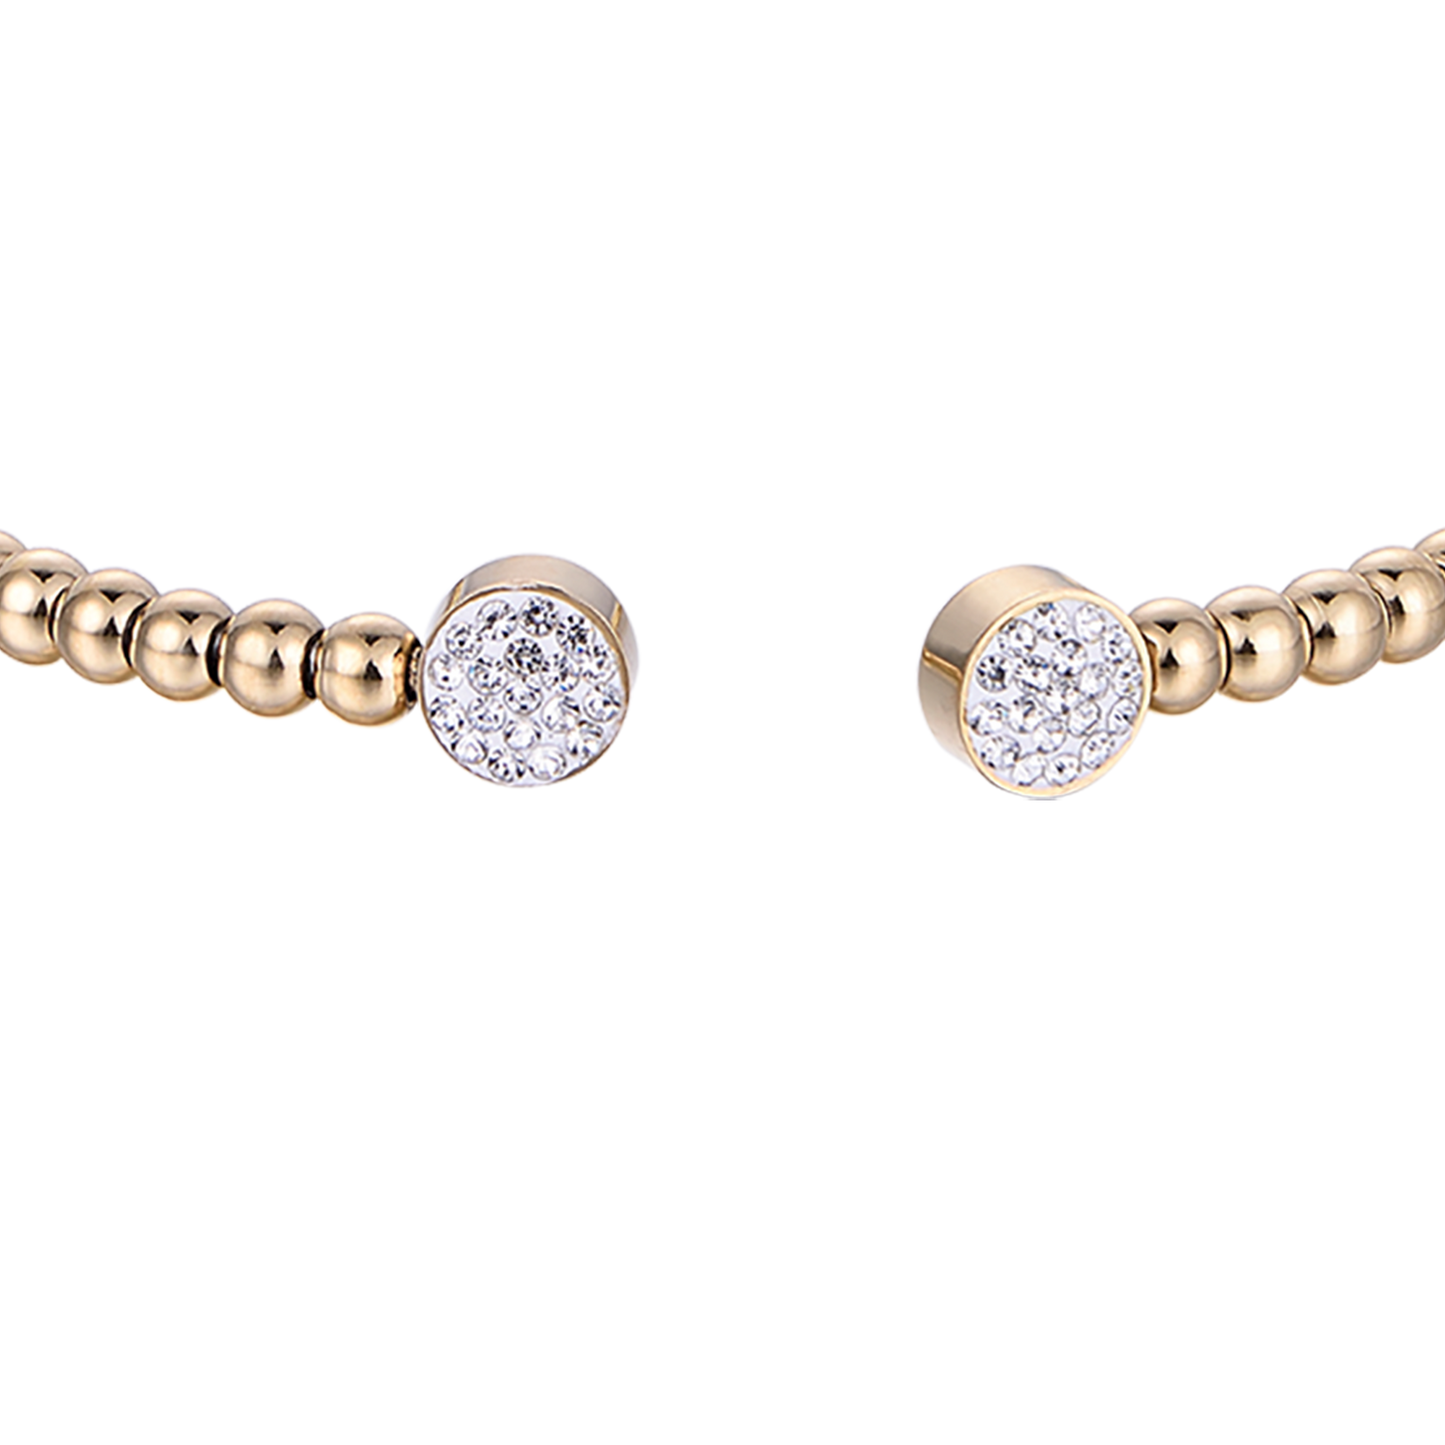 IP GOLD STEEL BRACELET WITH WHITE CRYSTALS Luca Barra